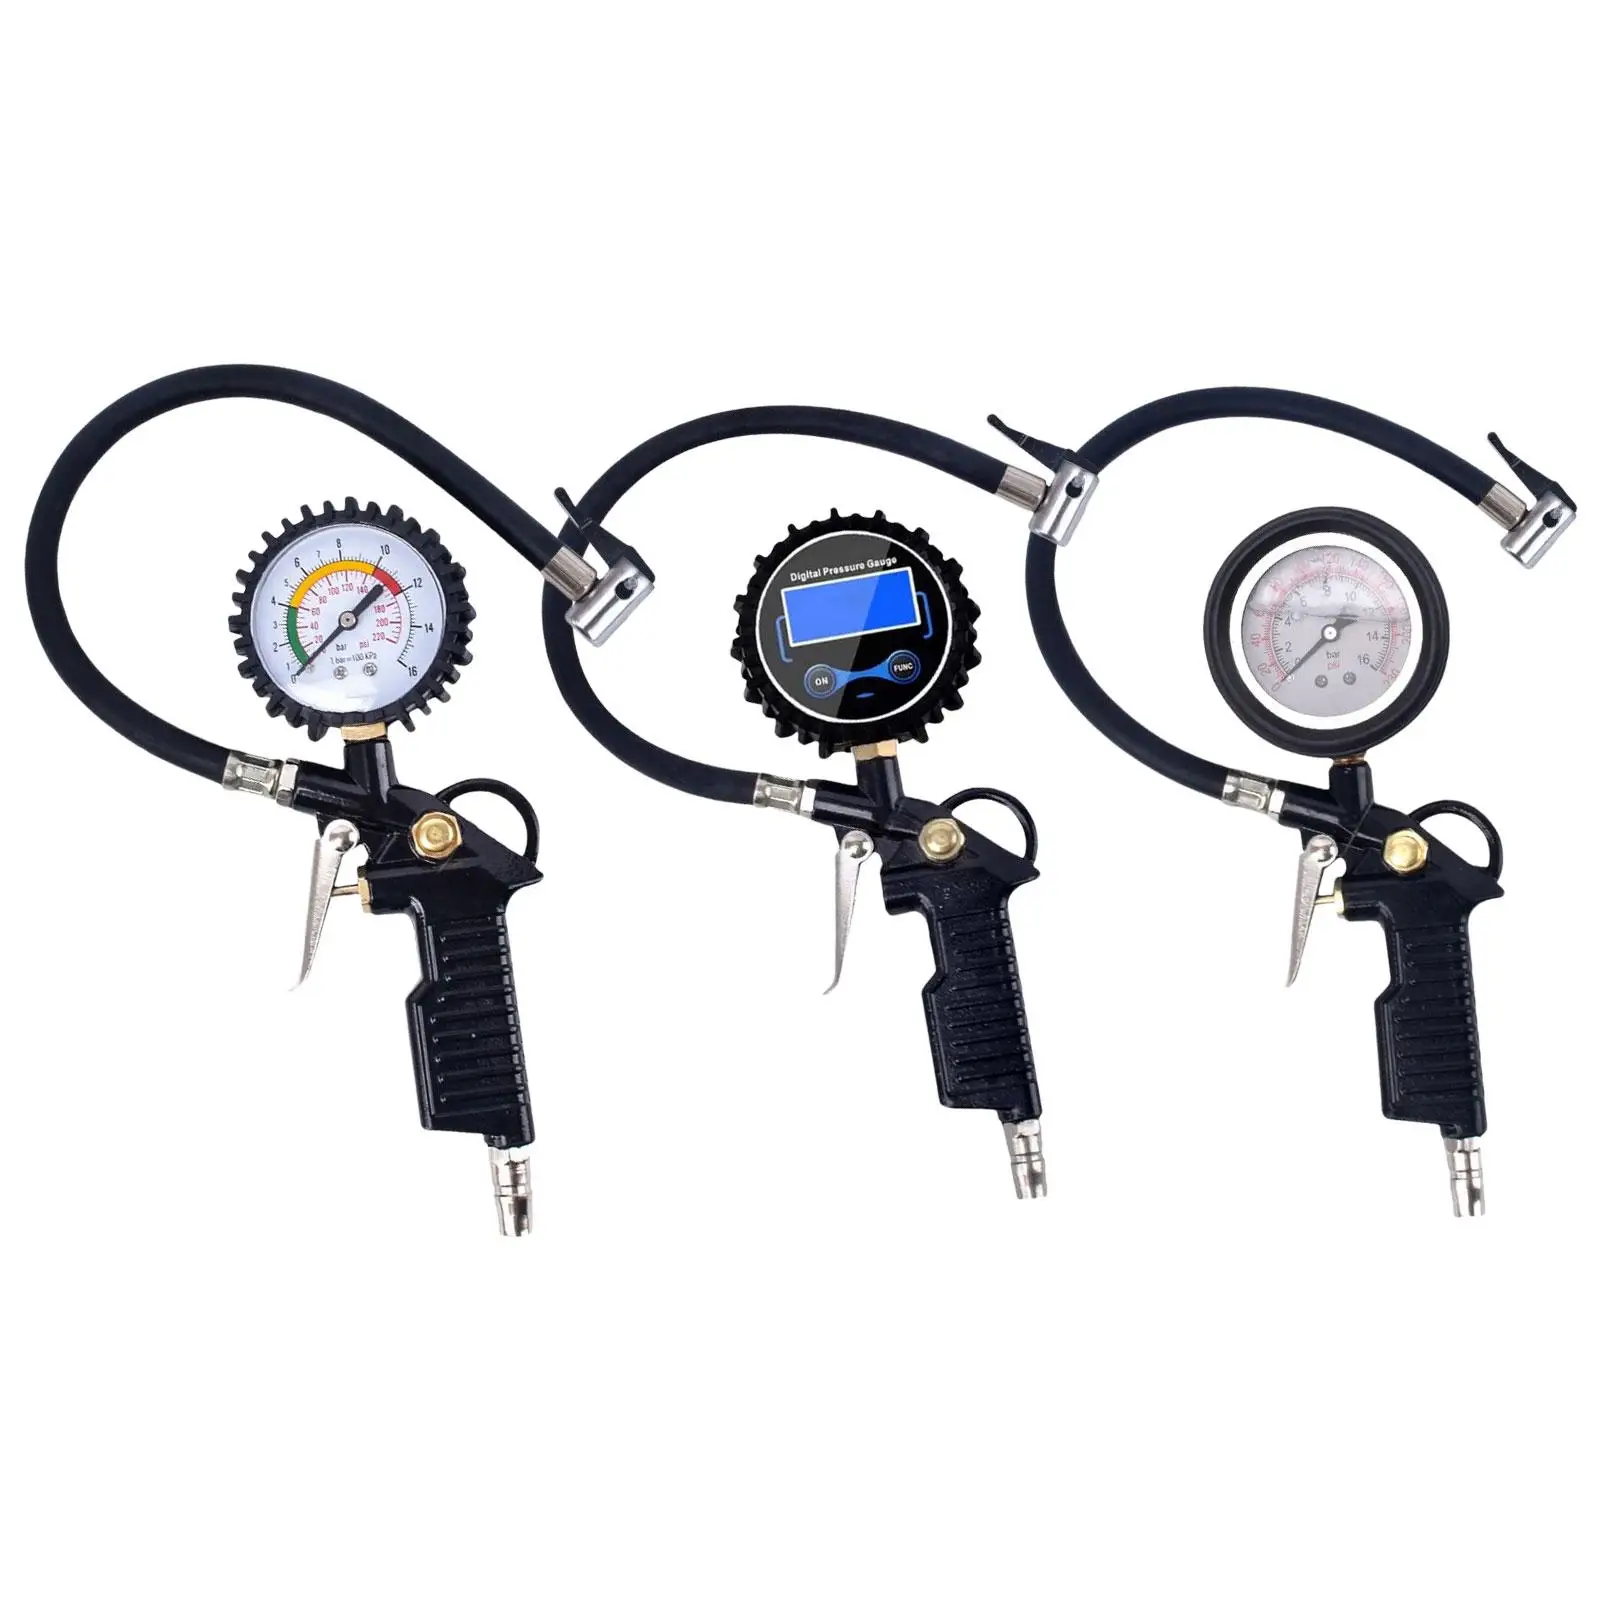 Automobile Tire Pressure Gauge Universal with Backlight Shockproof Fit for Tire Shops